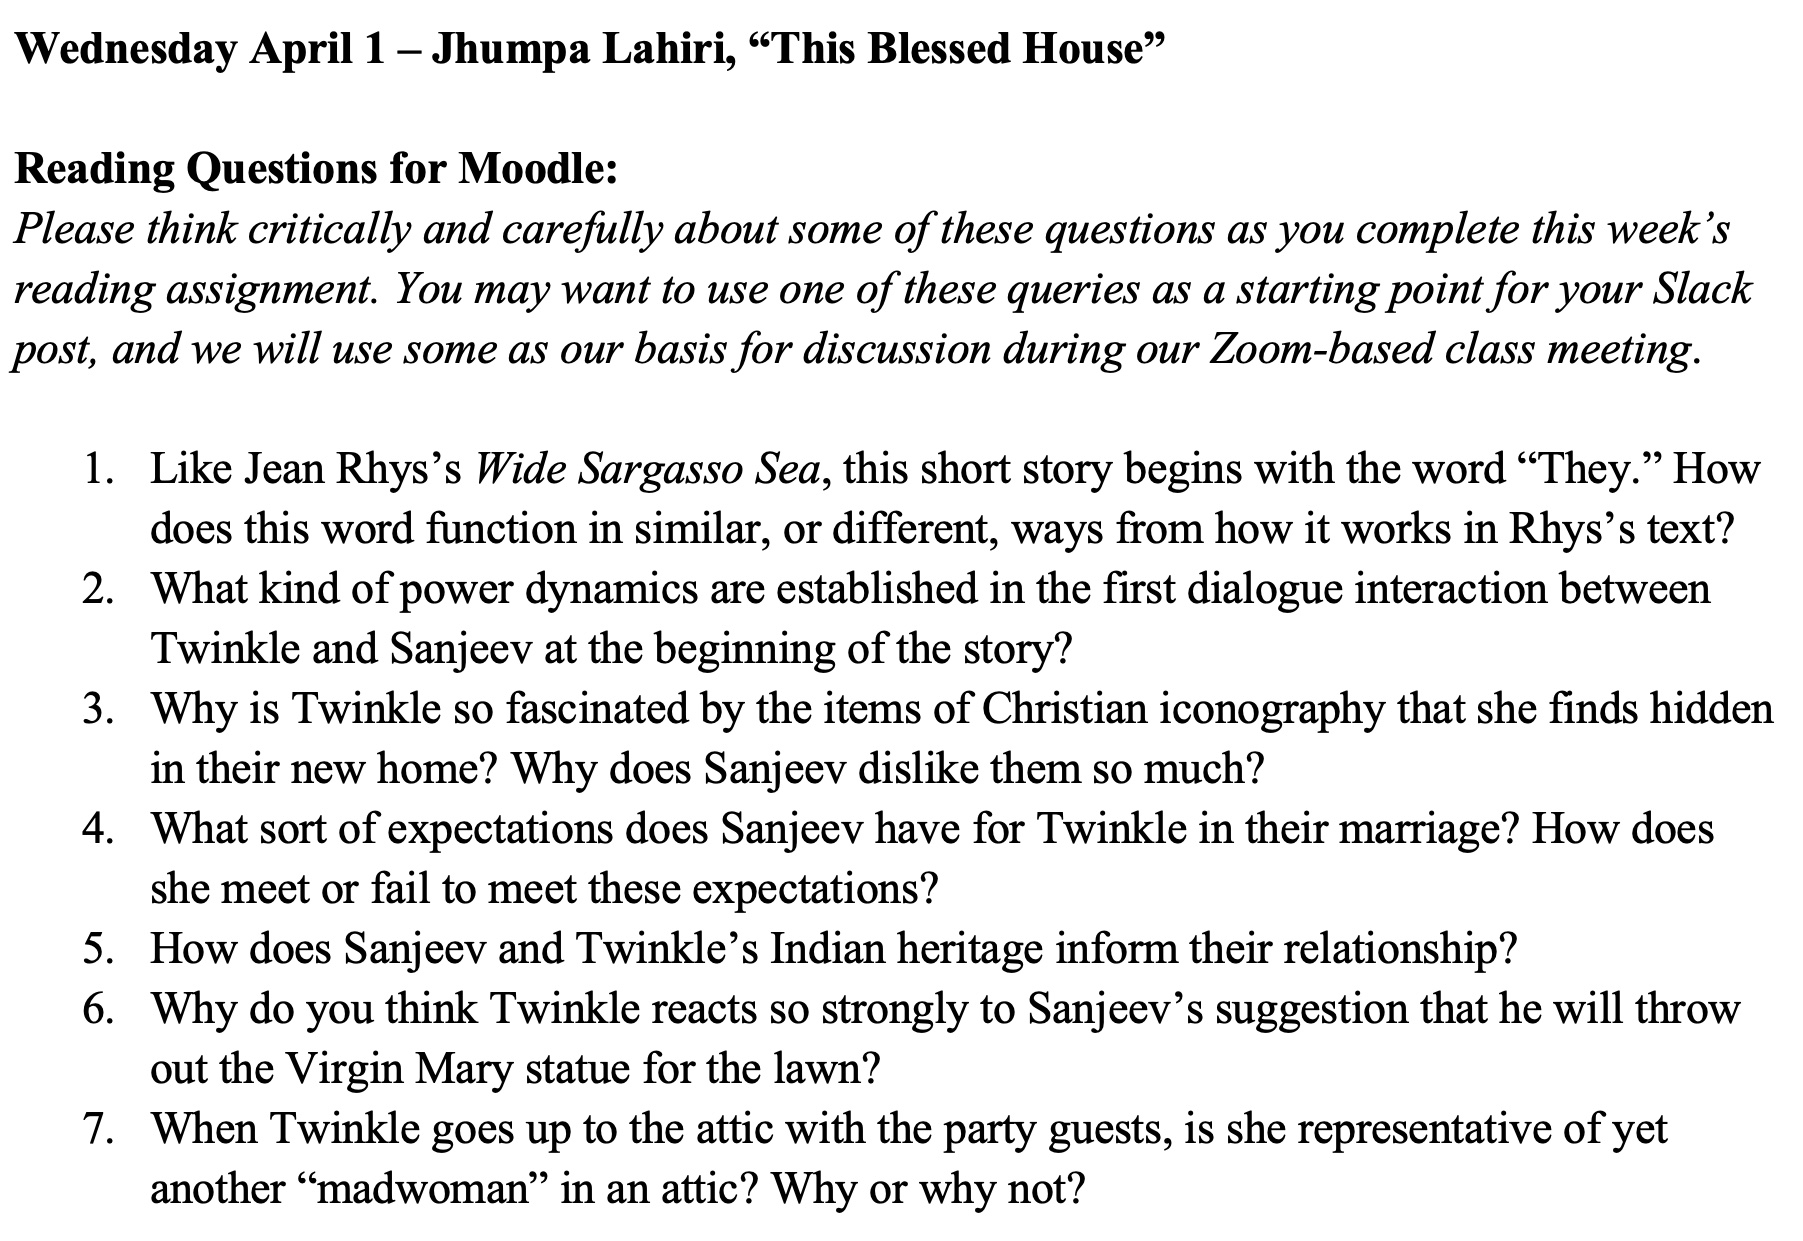 Fig. 1.Weekly reading questions posted to Moodle for Jhumpa Lahiri’s “This Blessed House” (1999), as prepared in Microsoft Word (I no longer have access to my prior institution’s LMS). This black-and-white image contains a screenshot of weekly reading questions. At the top of the image is the date and topic in bolded text: “Wednesday April 1 — Jhumpa Lahiri, “This Blessed House.” Below are a set of “Reading Questions for Moodle” with instructions in italics. Below the instructions are seven numbered questions.
